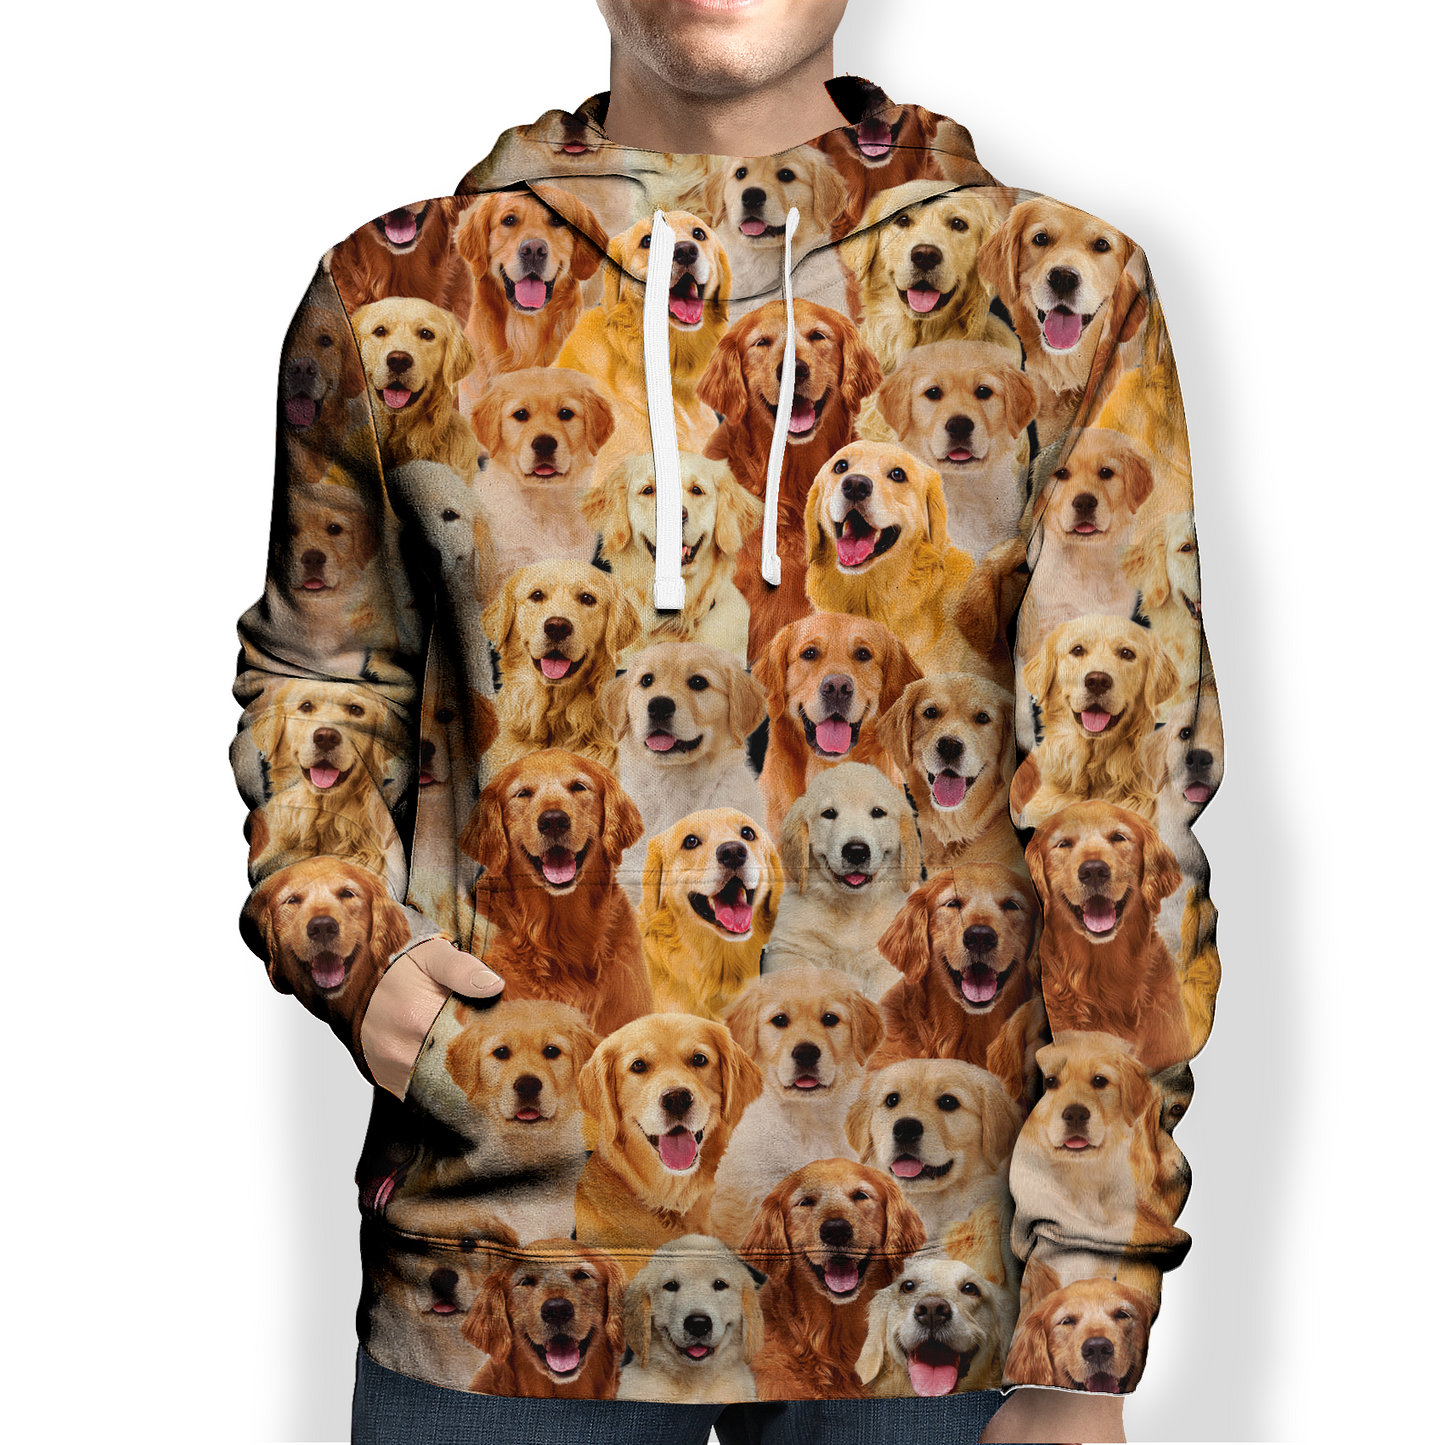 You Will Have A Bunch Of Golden Retrievers - Hoodie V1